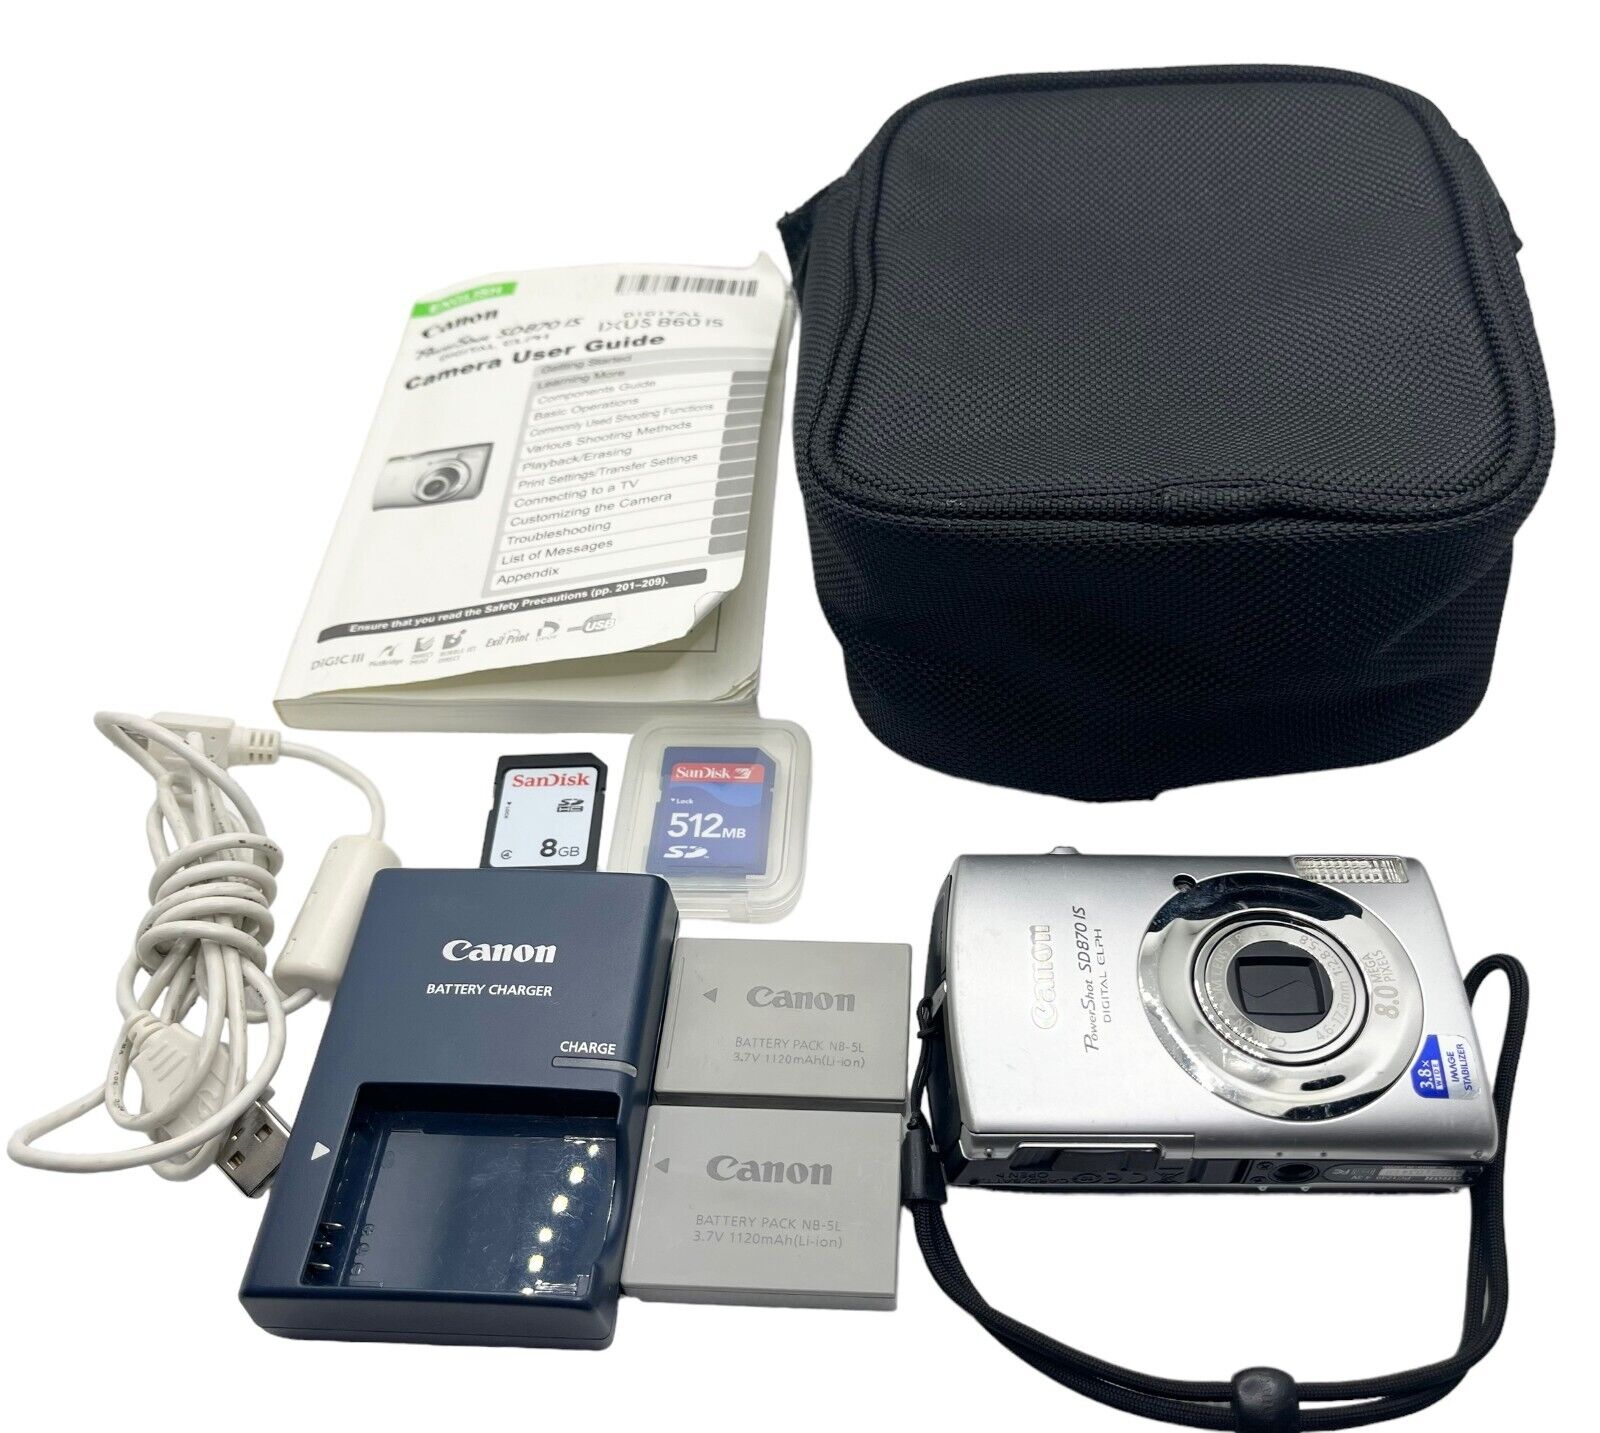 Canon PowerShot SD870 IS ELPH 8MP Digital Camera 2 Batteries Charger Memory Card